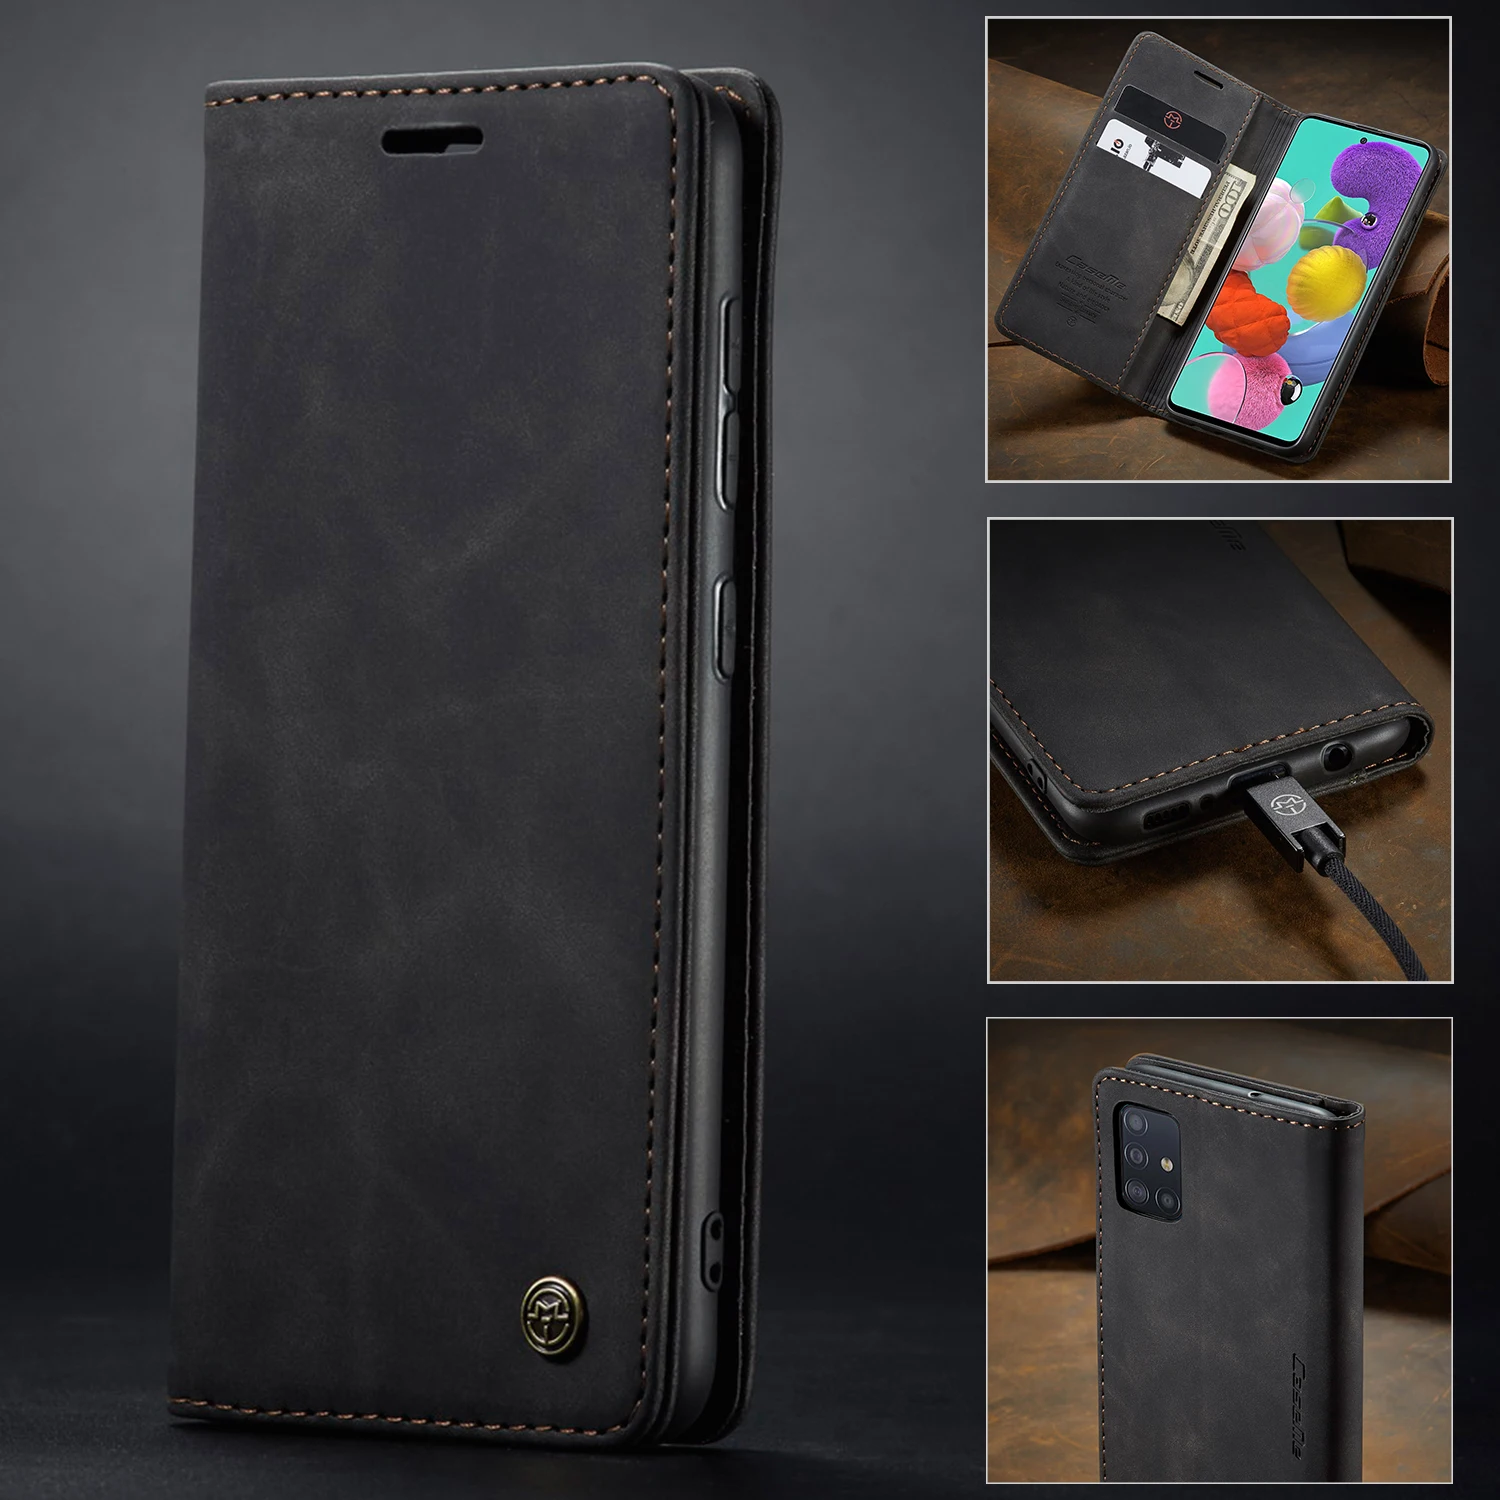 

Case For Samsung Galaxy A50 A20 A30S A40 A21S A70 A51 A71 A81 A91 M31 Flip Magnetic Leather Wallet Cover M30S Note20 S20 Ultra